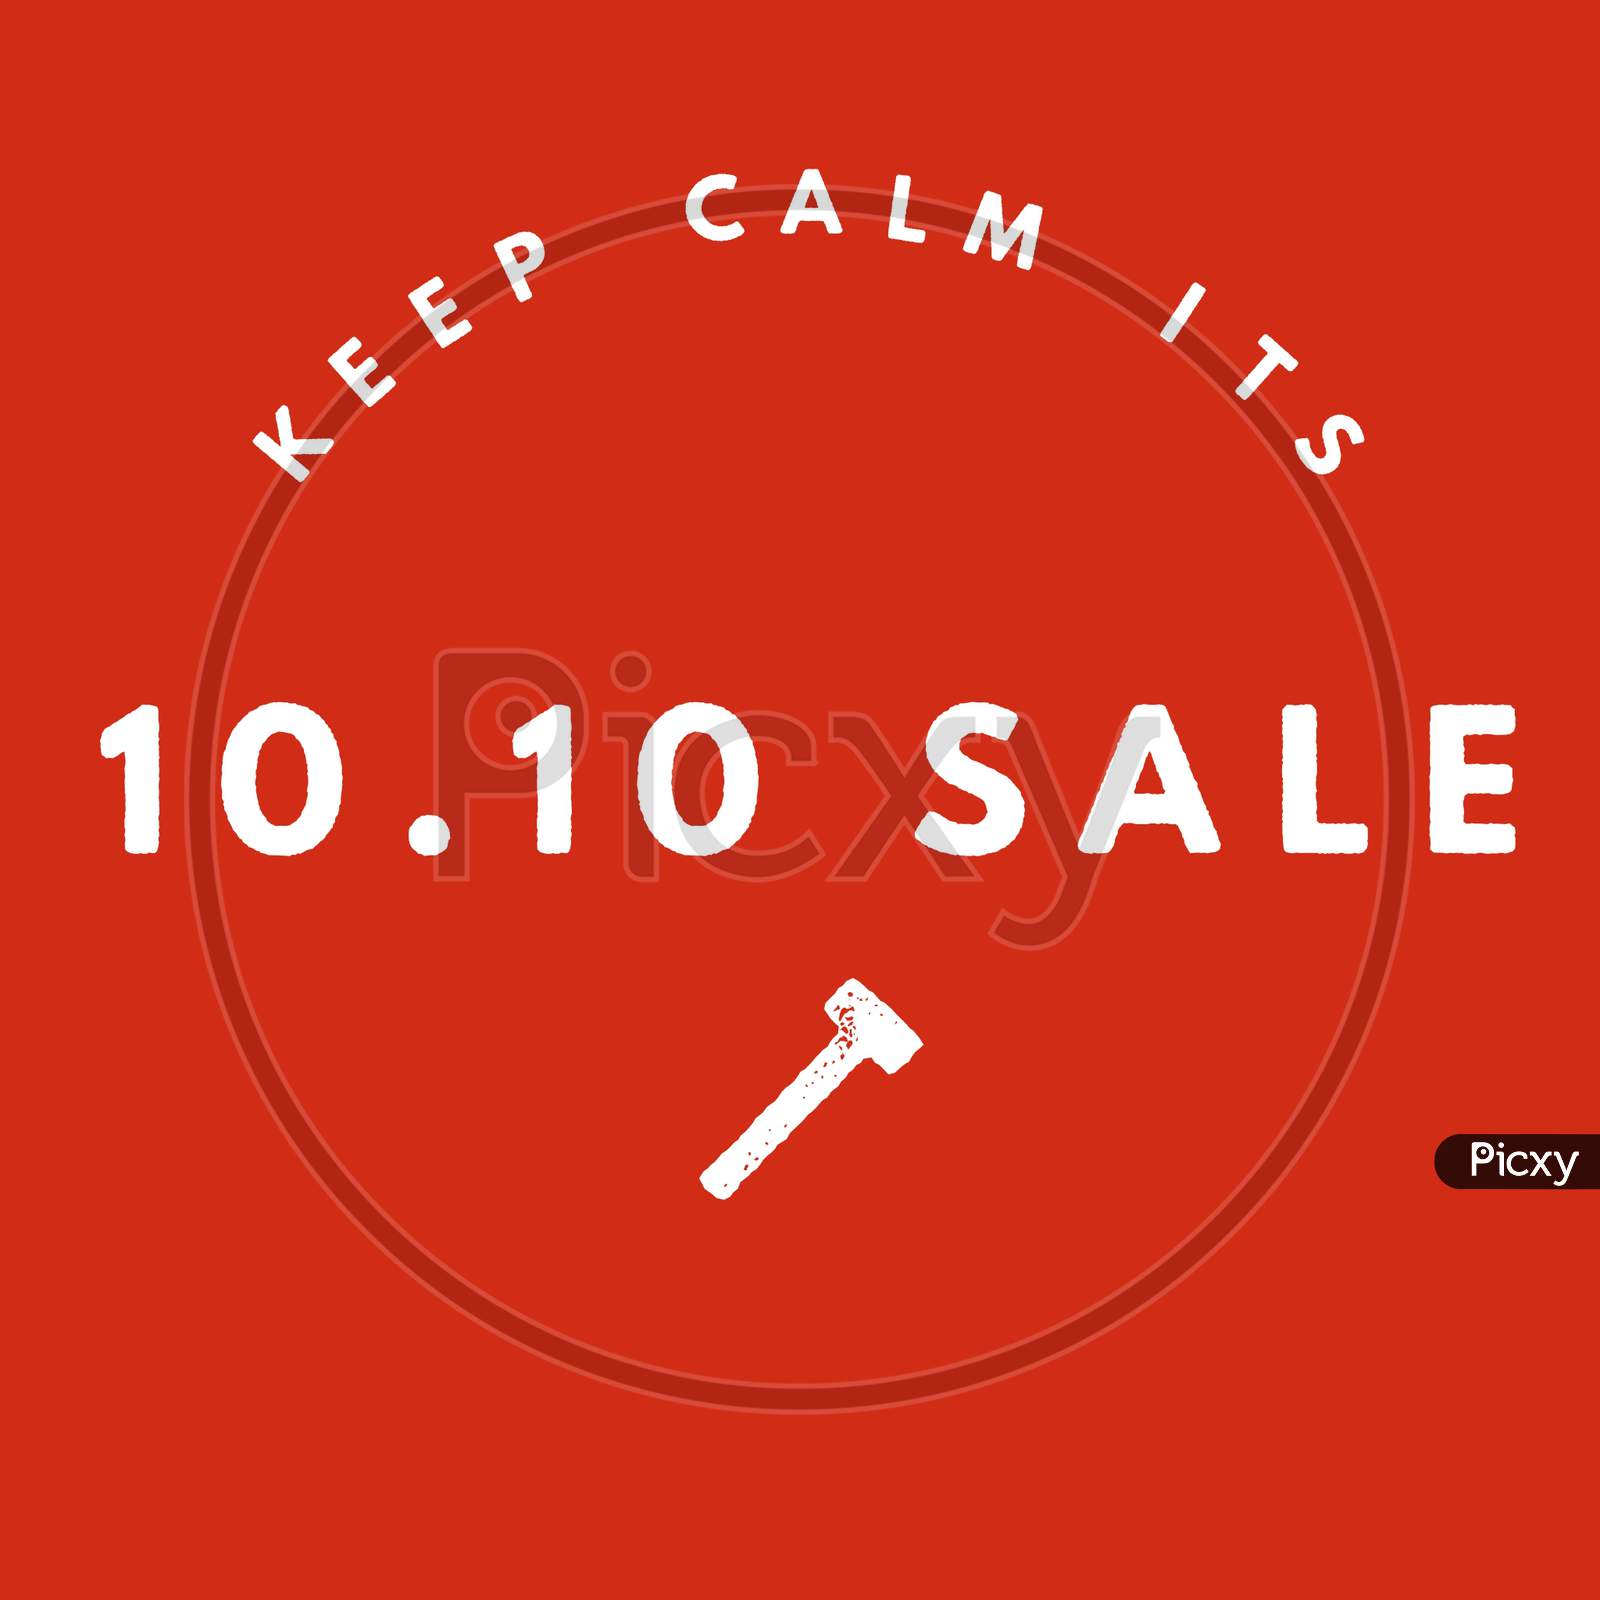 Image With Text "Keep Calm Its 10.10 Sale"